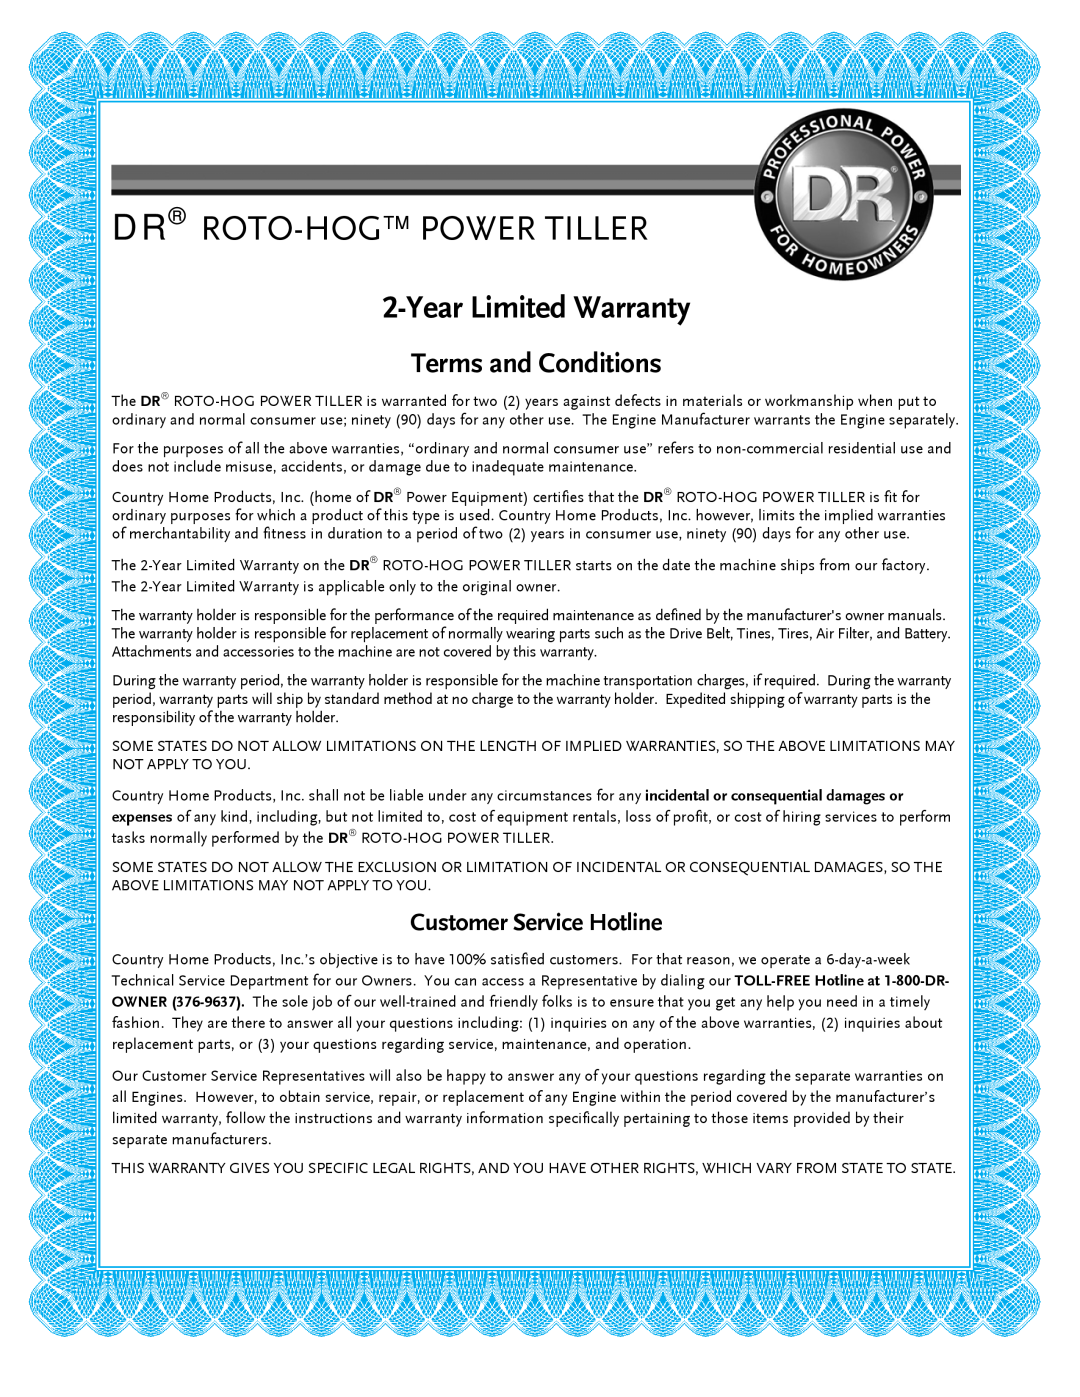 Country Home Products ROTO-HOGTM manual Dr Roto-Hog Power Tiller, Terms and Conditions, Customer Service Hotline 